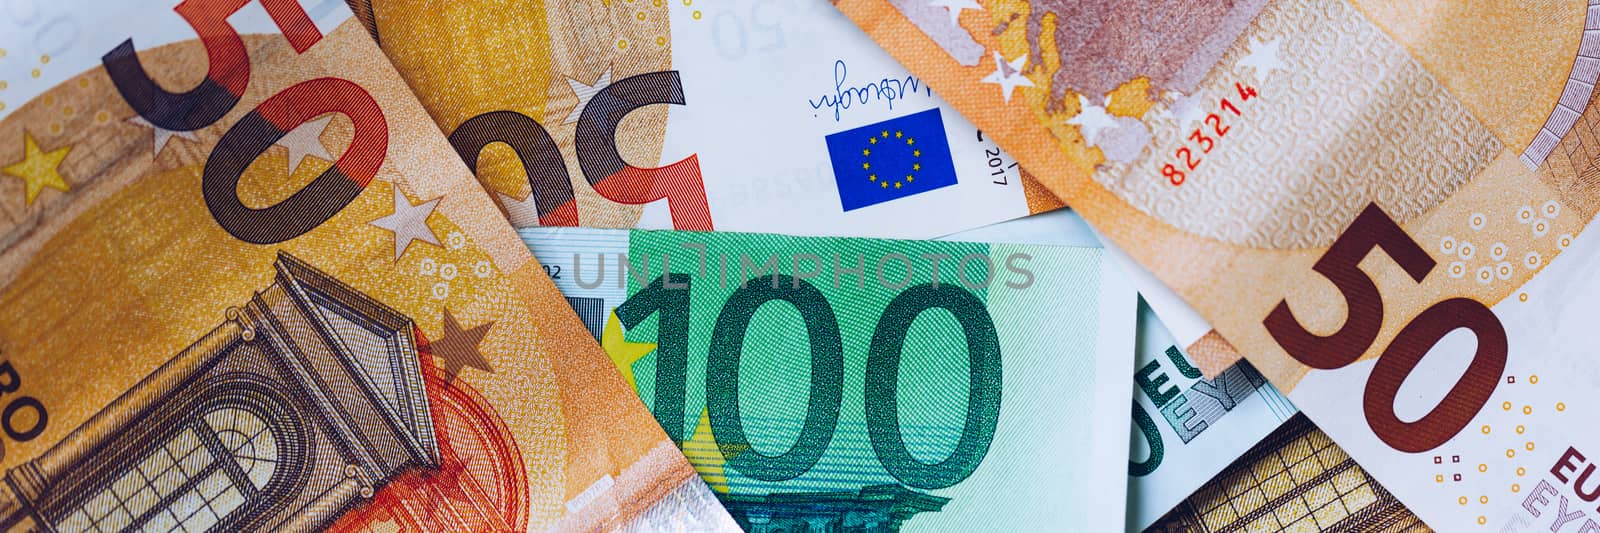 Euro money, Euro cash background. Banknotes of the european union. Euro cash. Many Euro banknotes of different values. 